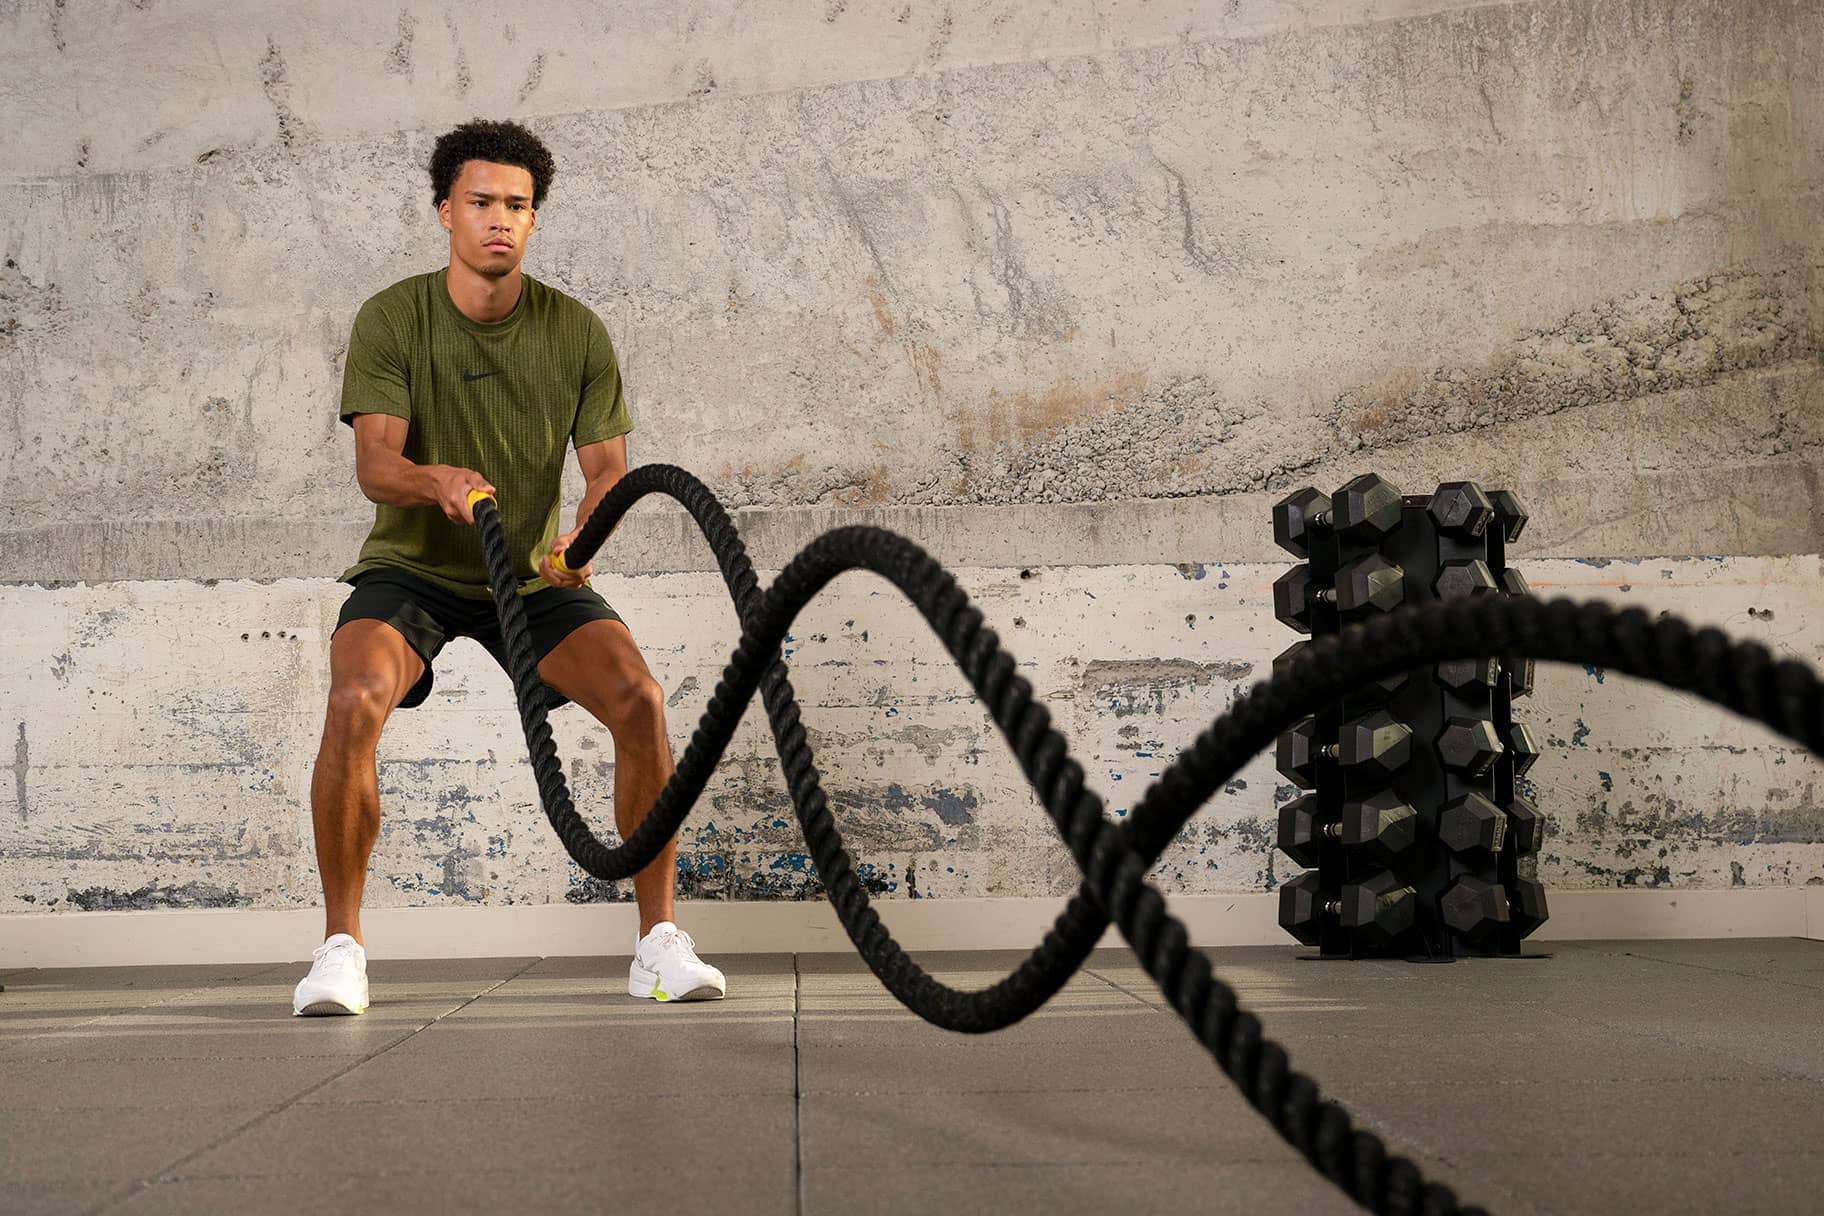 battle-ropes-what-they-are-their-benefits-and-exercises-you-can-do